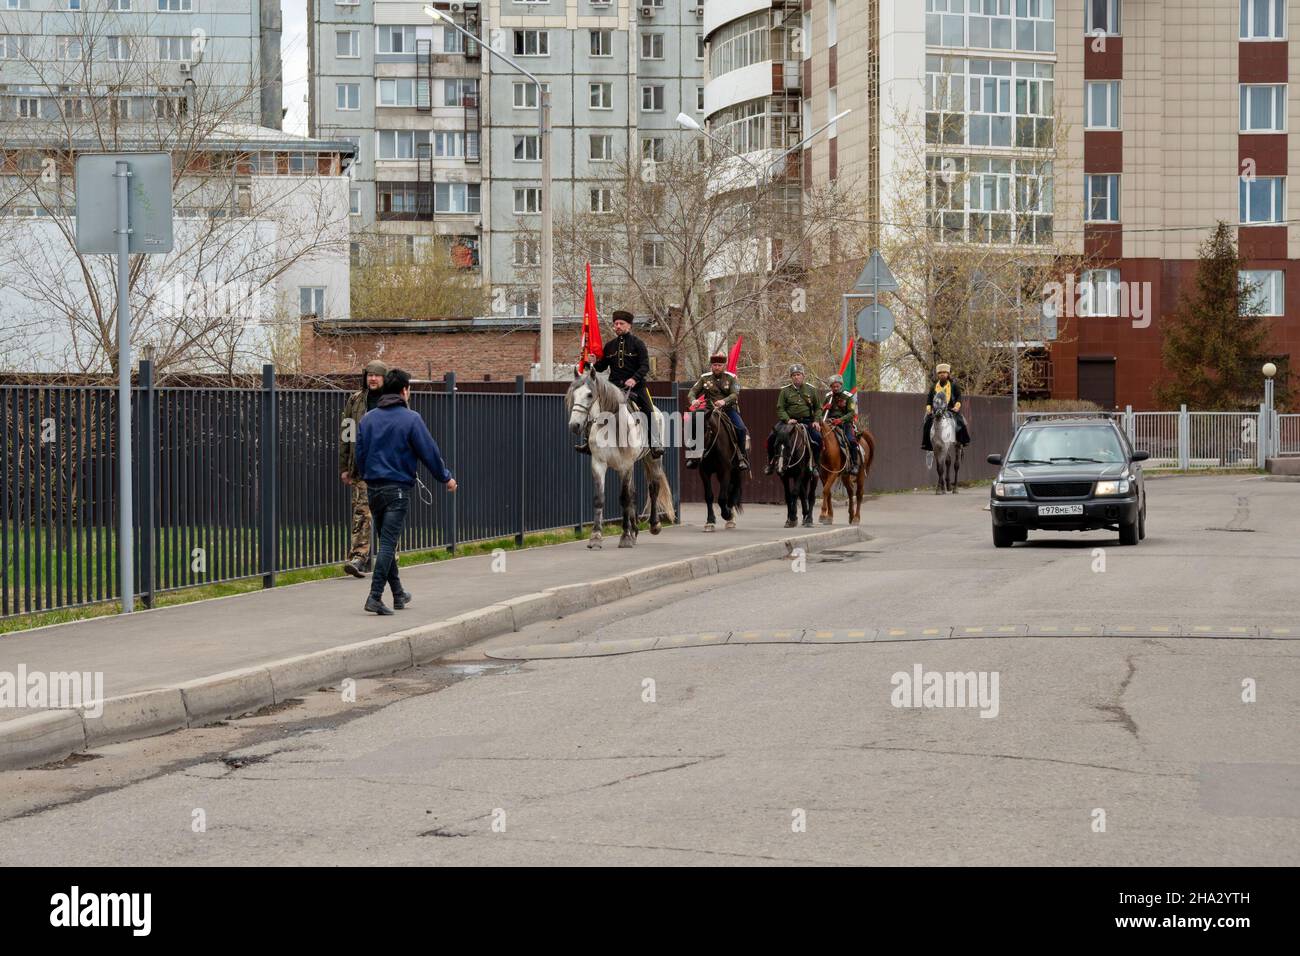 A group of Cossacks with flags rides on horseback along the sidewalk against the backdrop of residential buildings in the spring city. Stock Photo